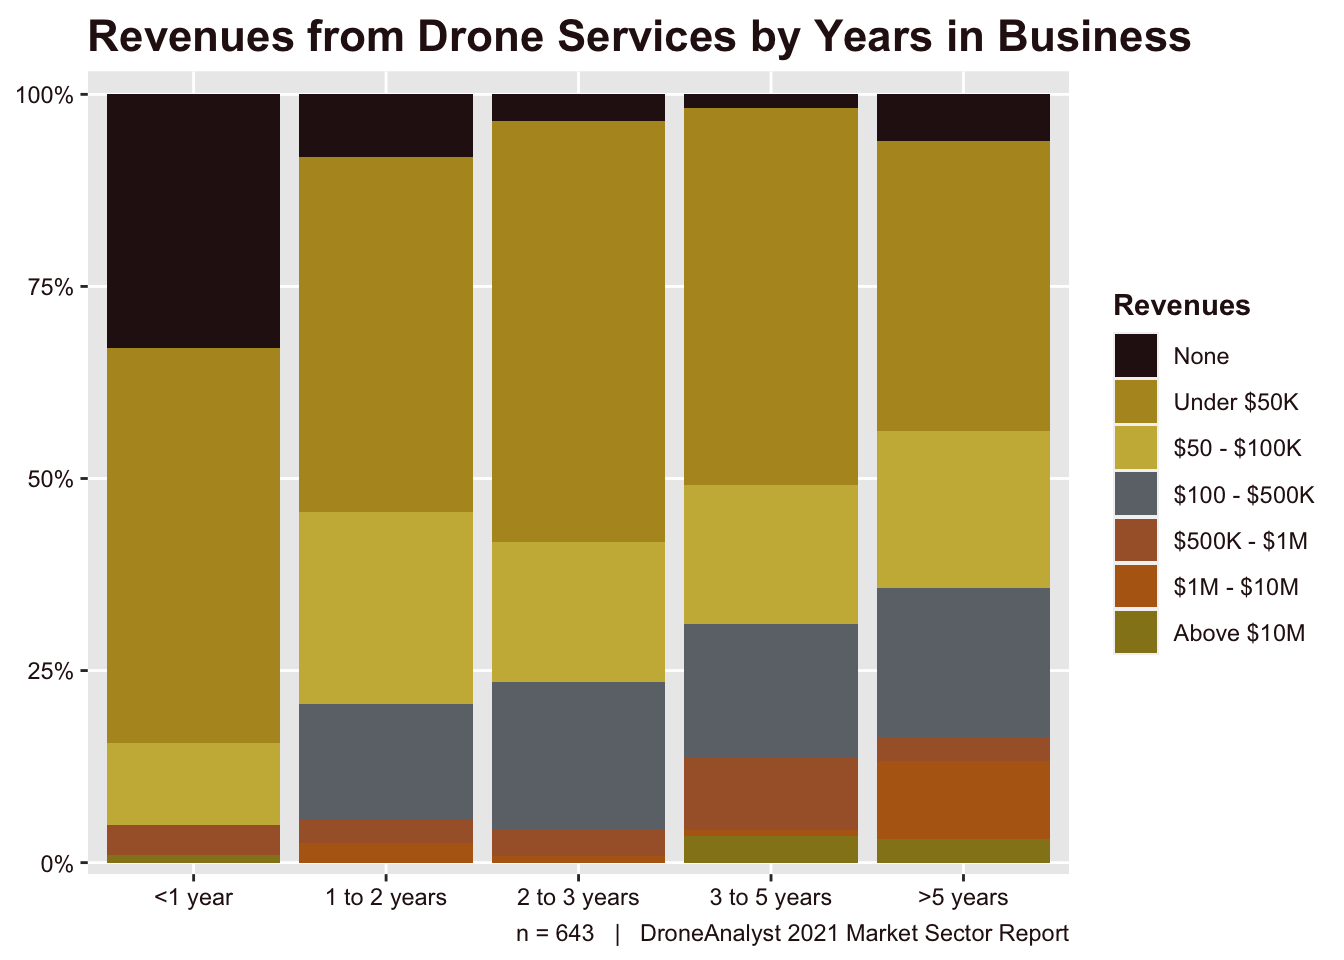 Revenues from Drone Services by Years in Business